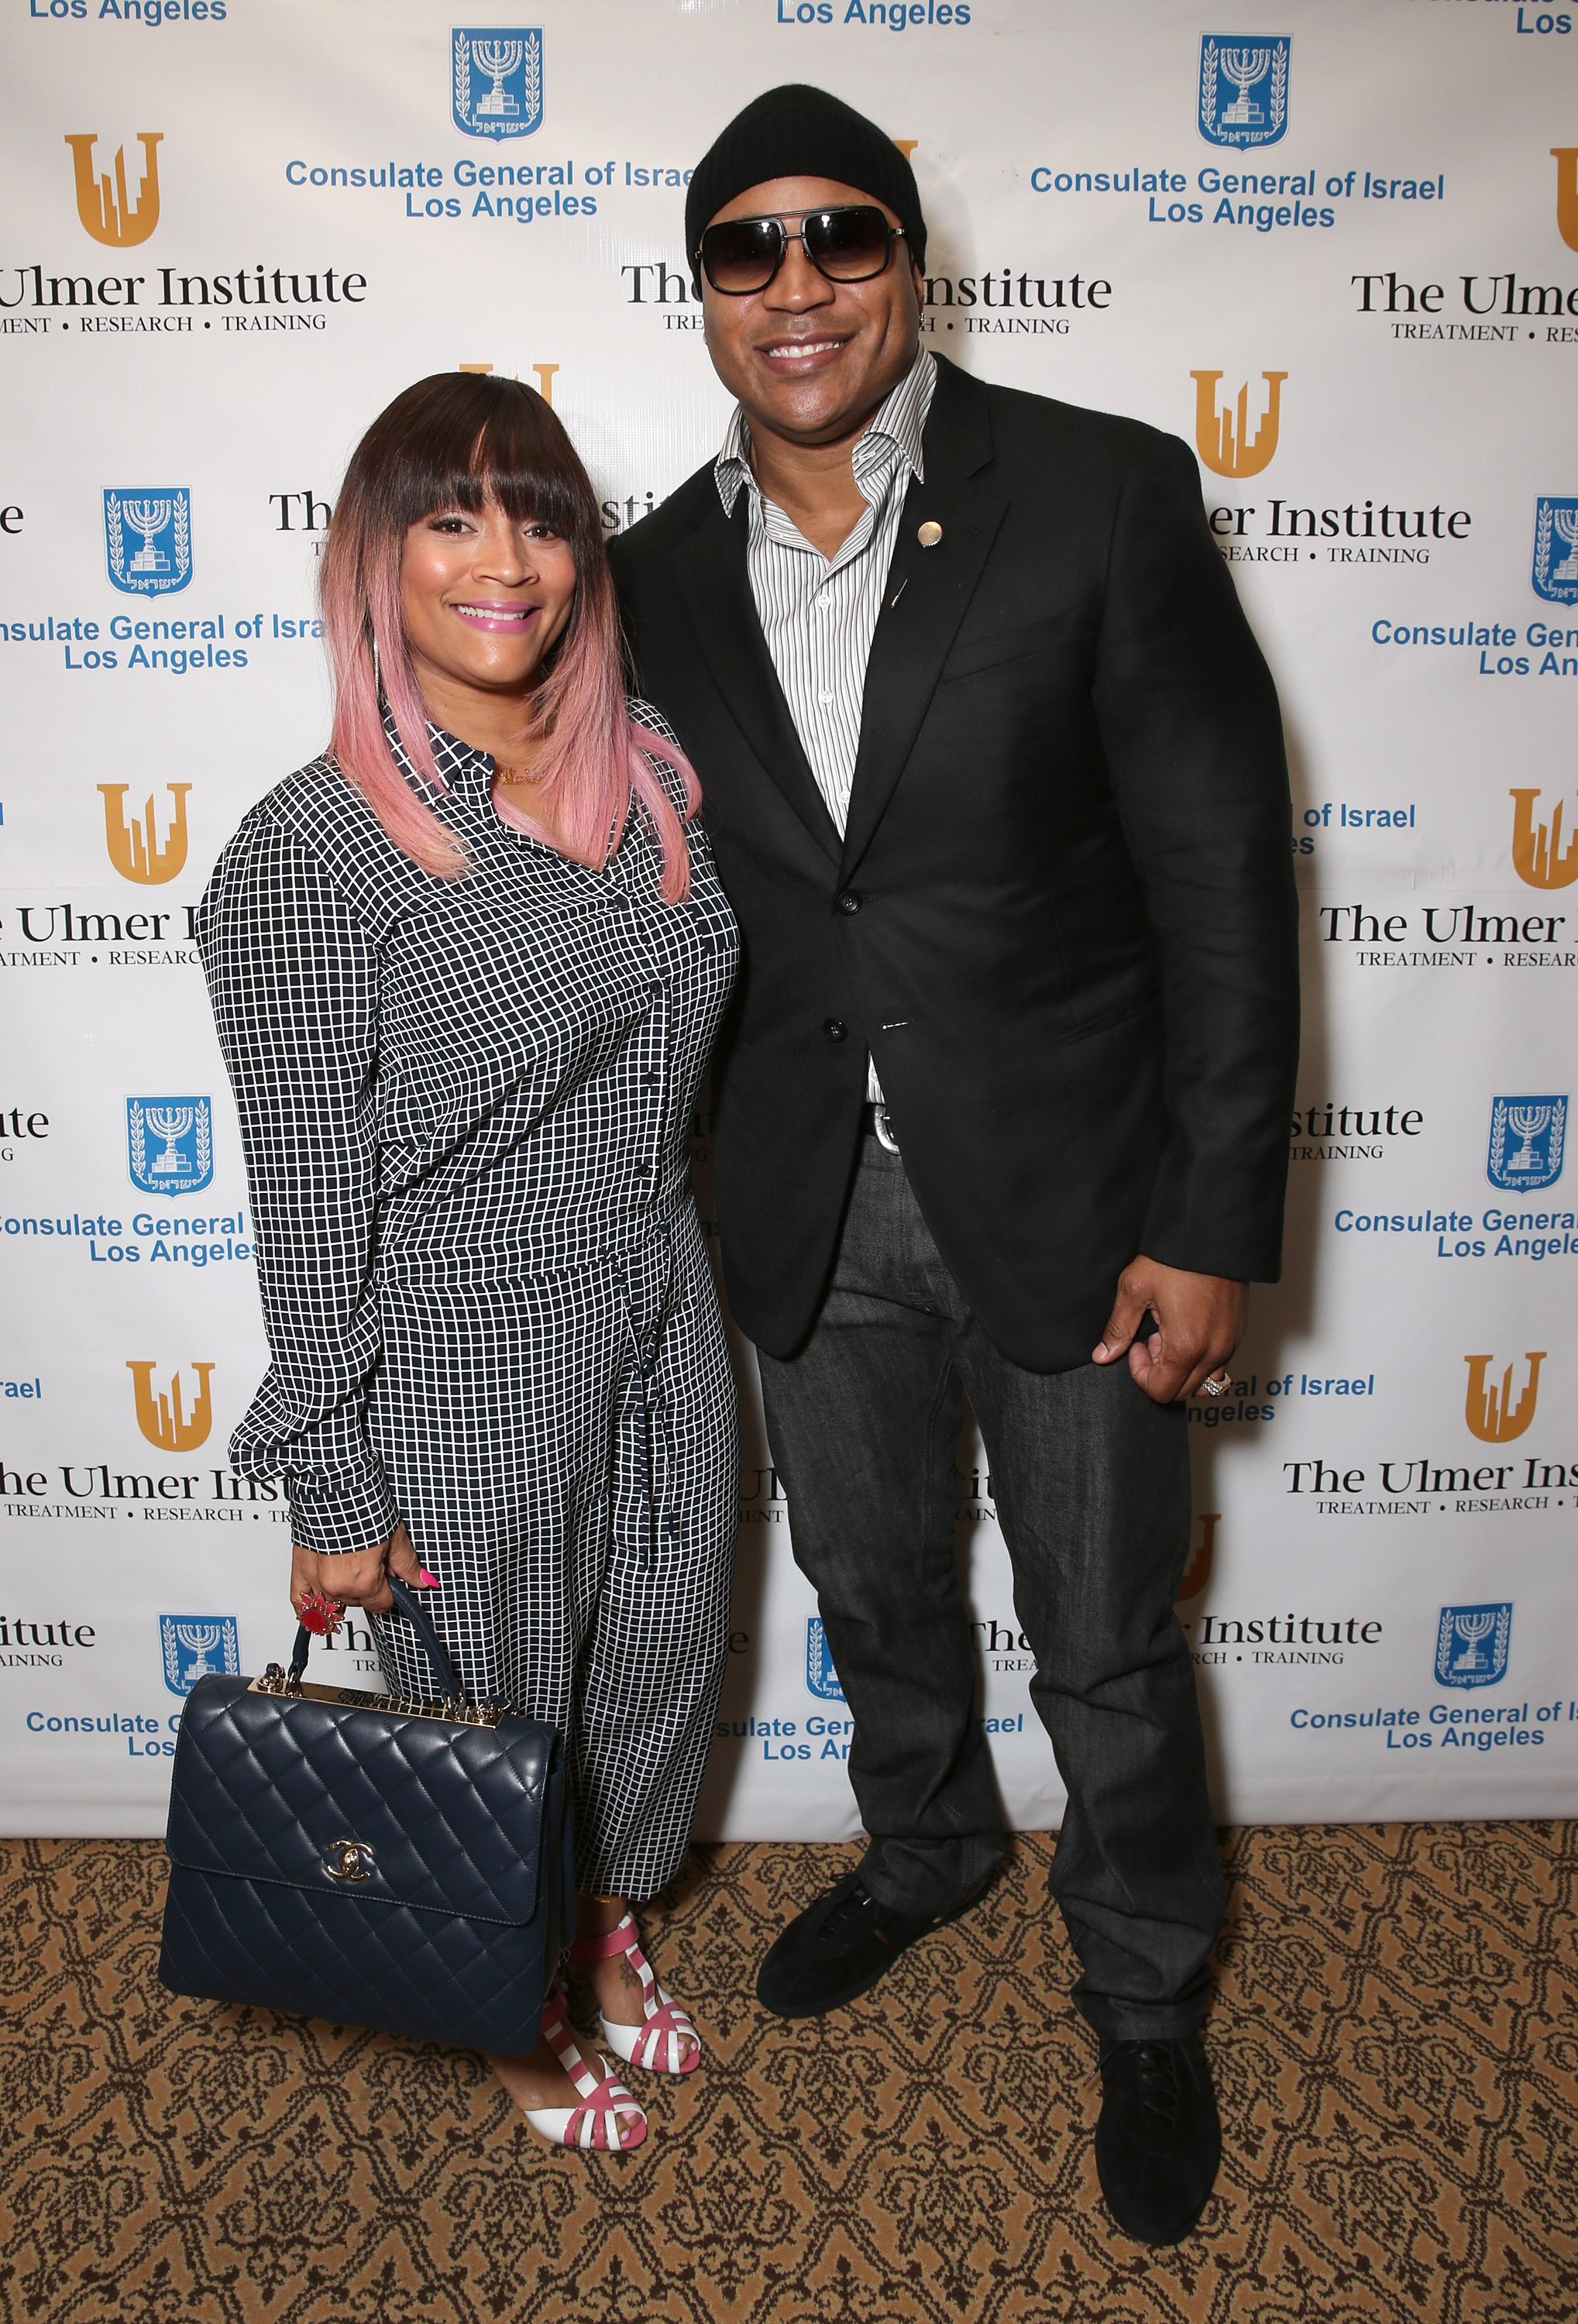 Simone Smith and LL Cool J at the Ulmer Institute launch celebration in Beverly Hills, California, 2016 | Photo Getty Images